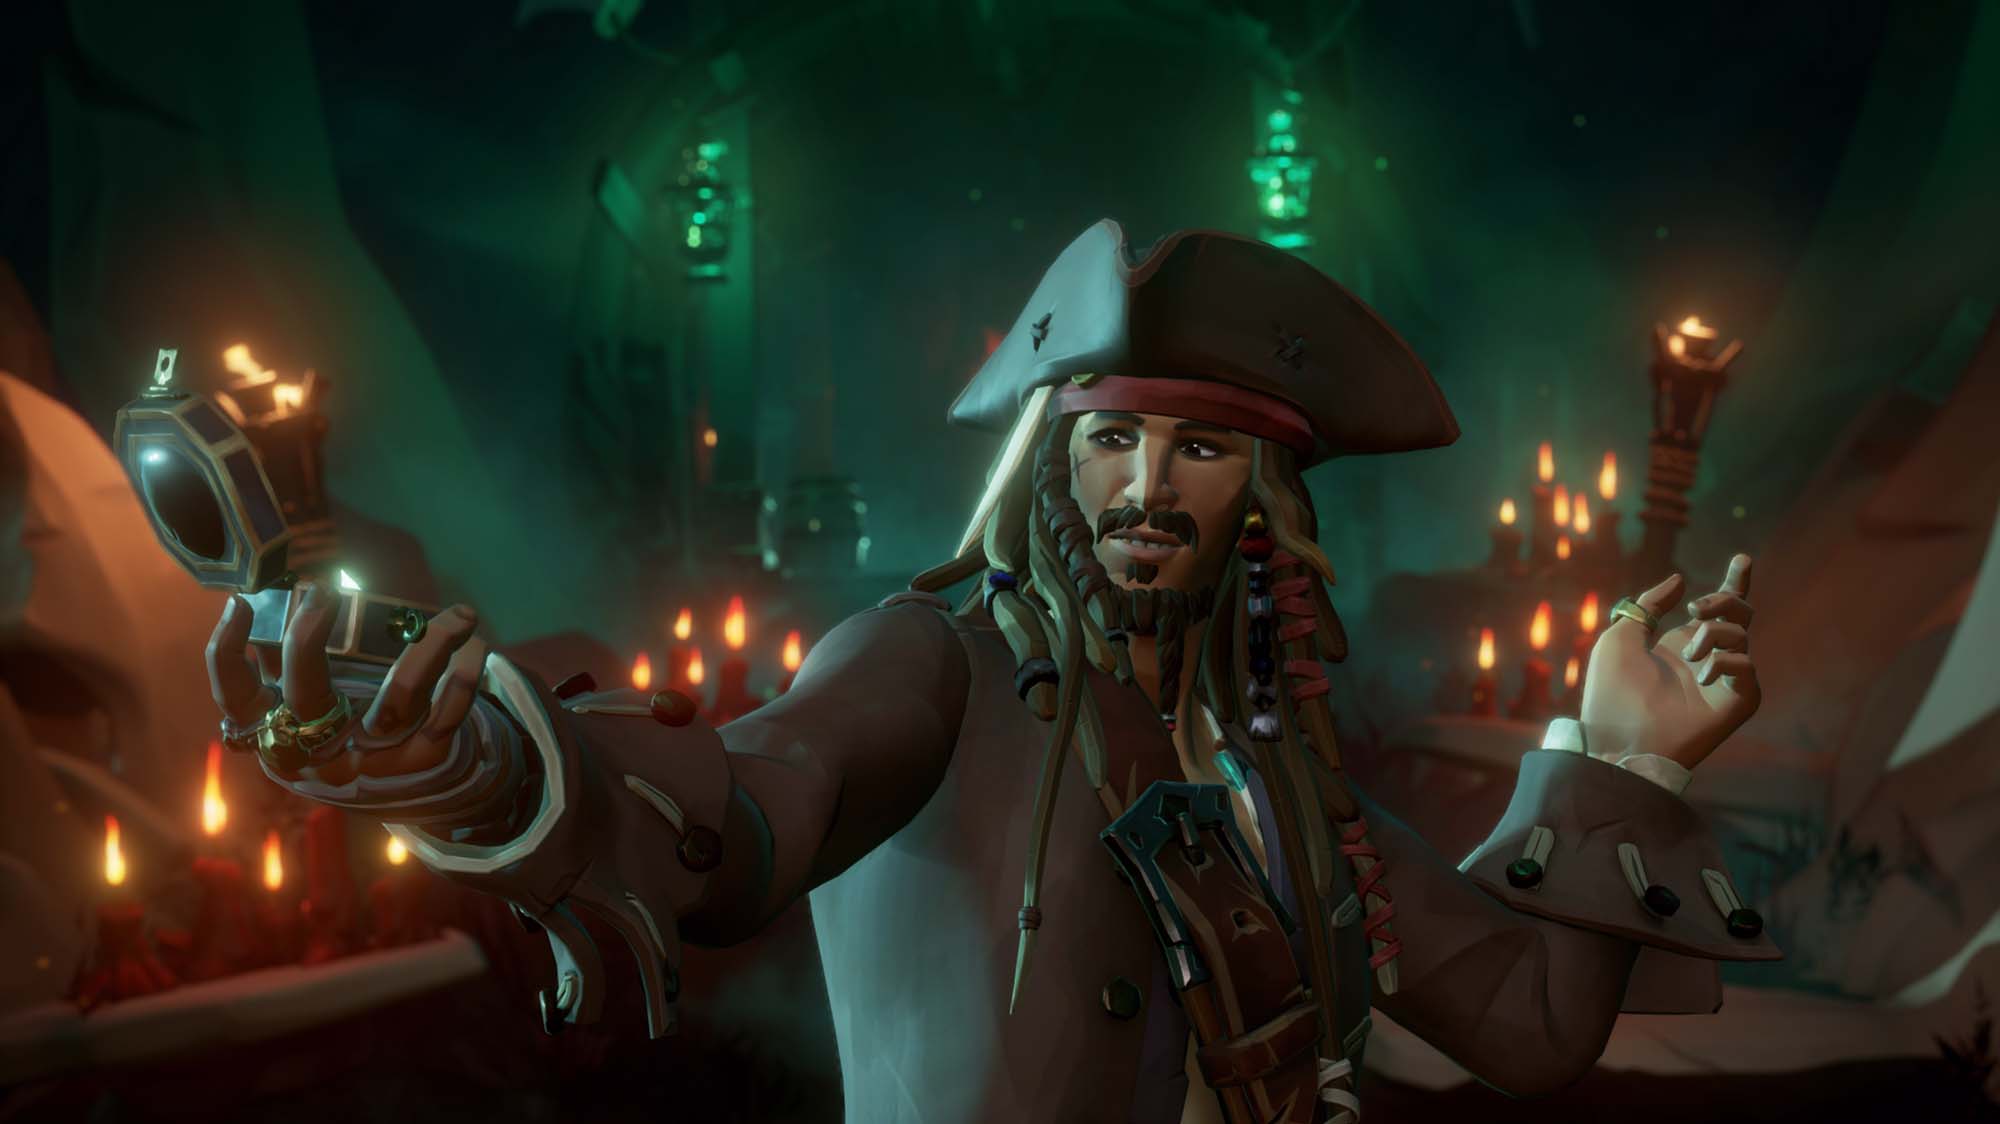 Jack Sparrow in Sea of Thieves